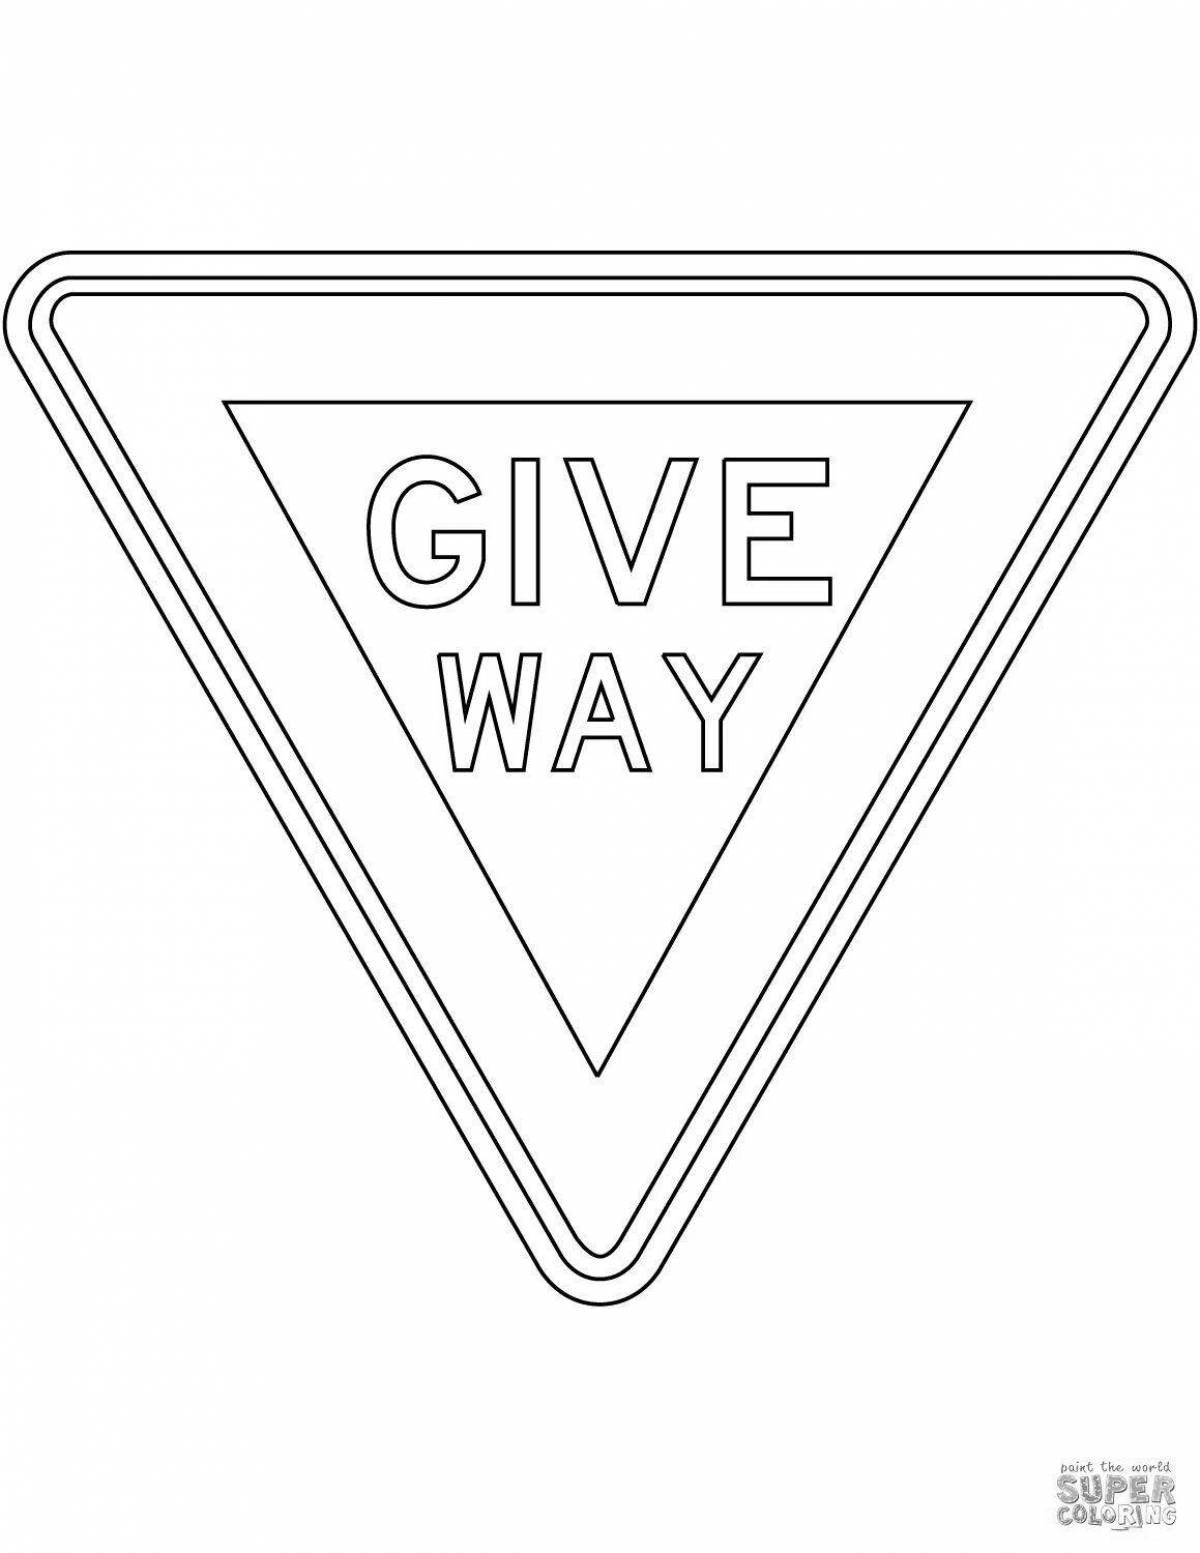 Give Way Live Coloring Page